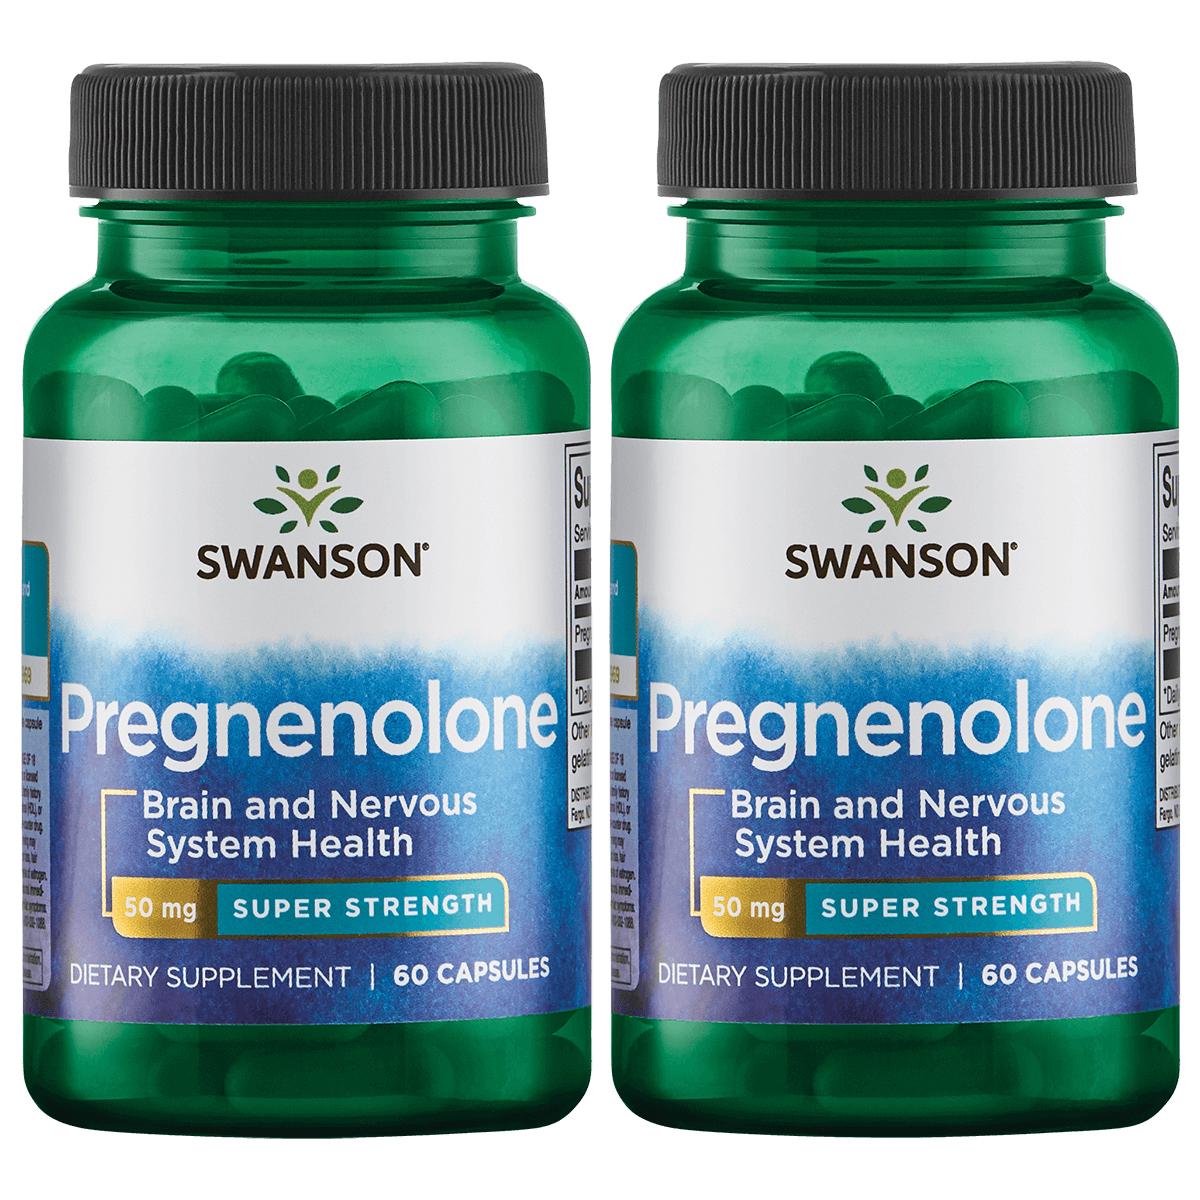 Swanson Ultra Pregnenolone - Super Strength 2 Pack Supplement Vitamin 50 mg 60 Caps